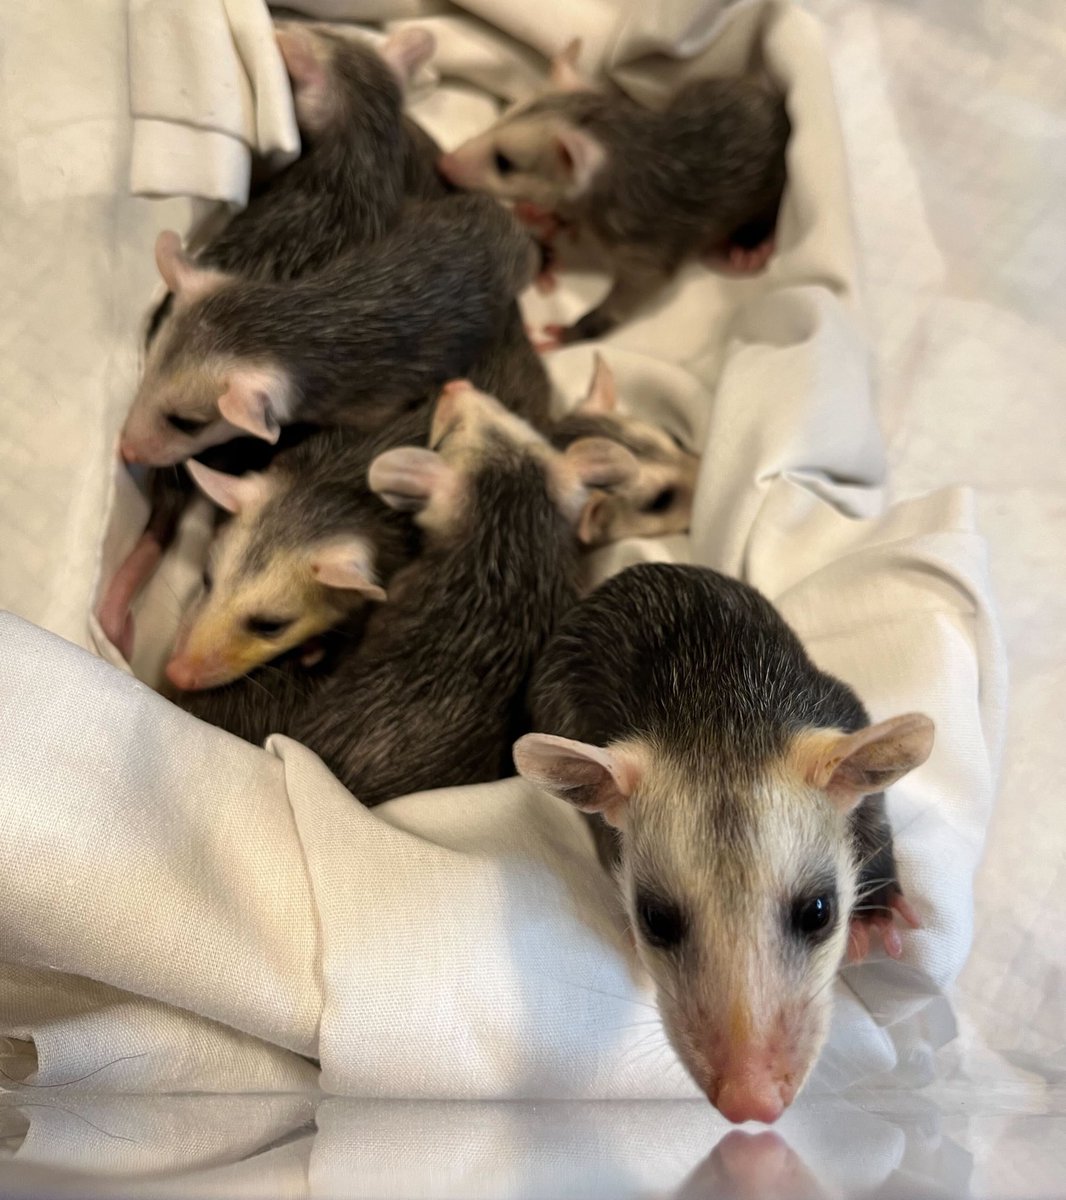 Opossum baby season has come to WBF. Yesterday we admitted these 9 precious joeys. They're about 11 weeks old and will need another 10 weeks or more of care before they're old enough to be released. 📷: Phyllis Tseng